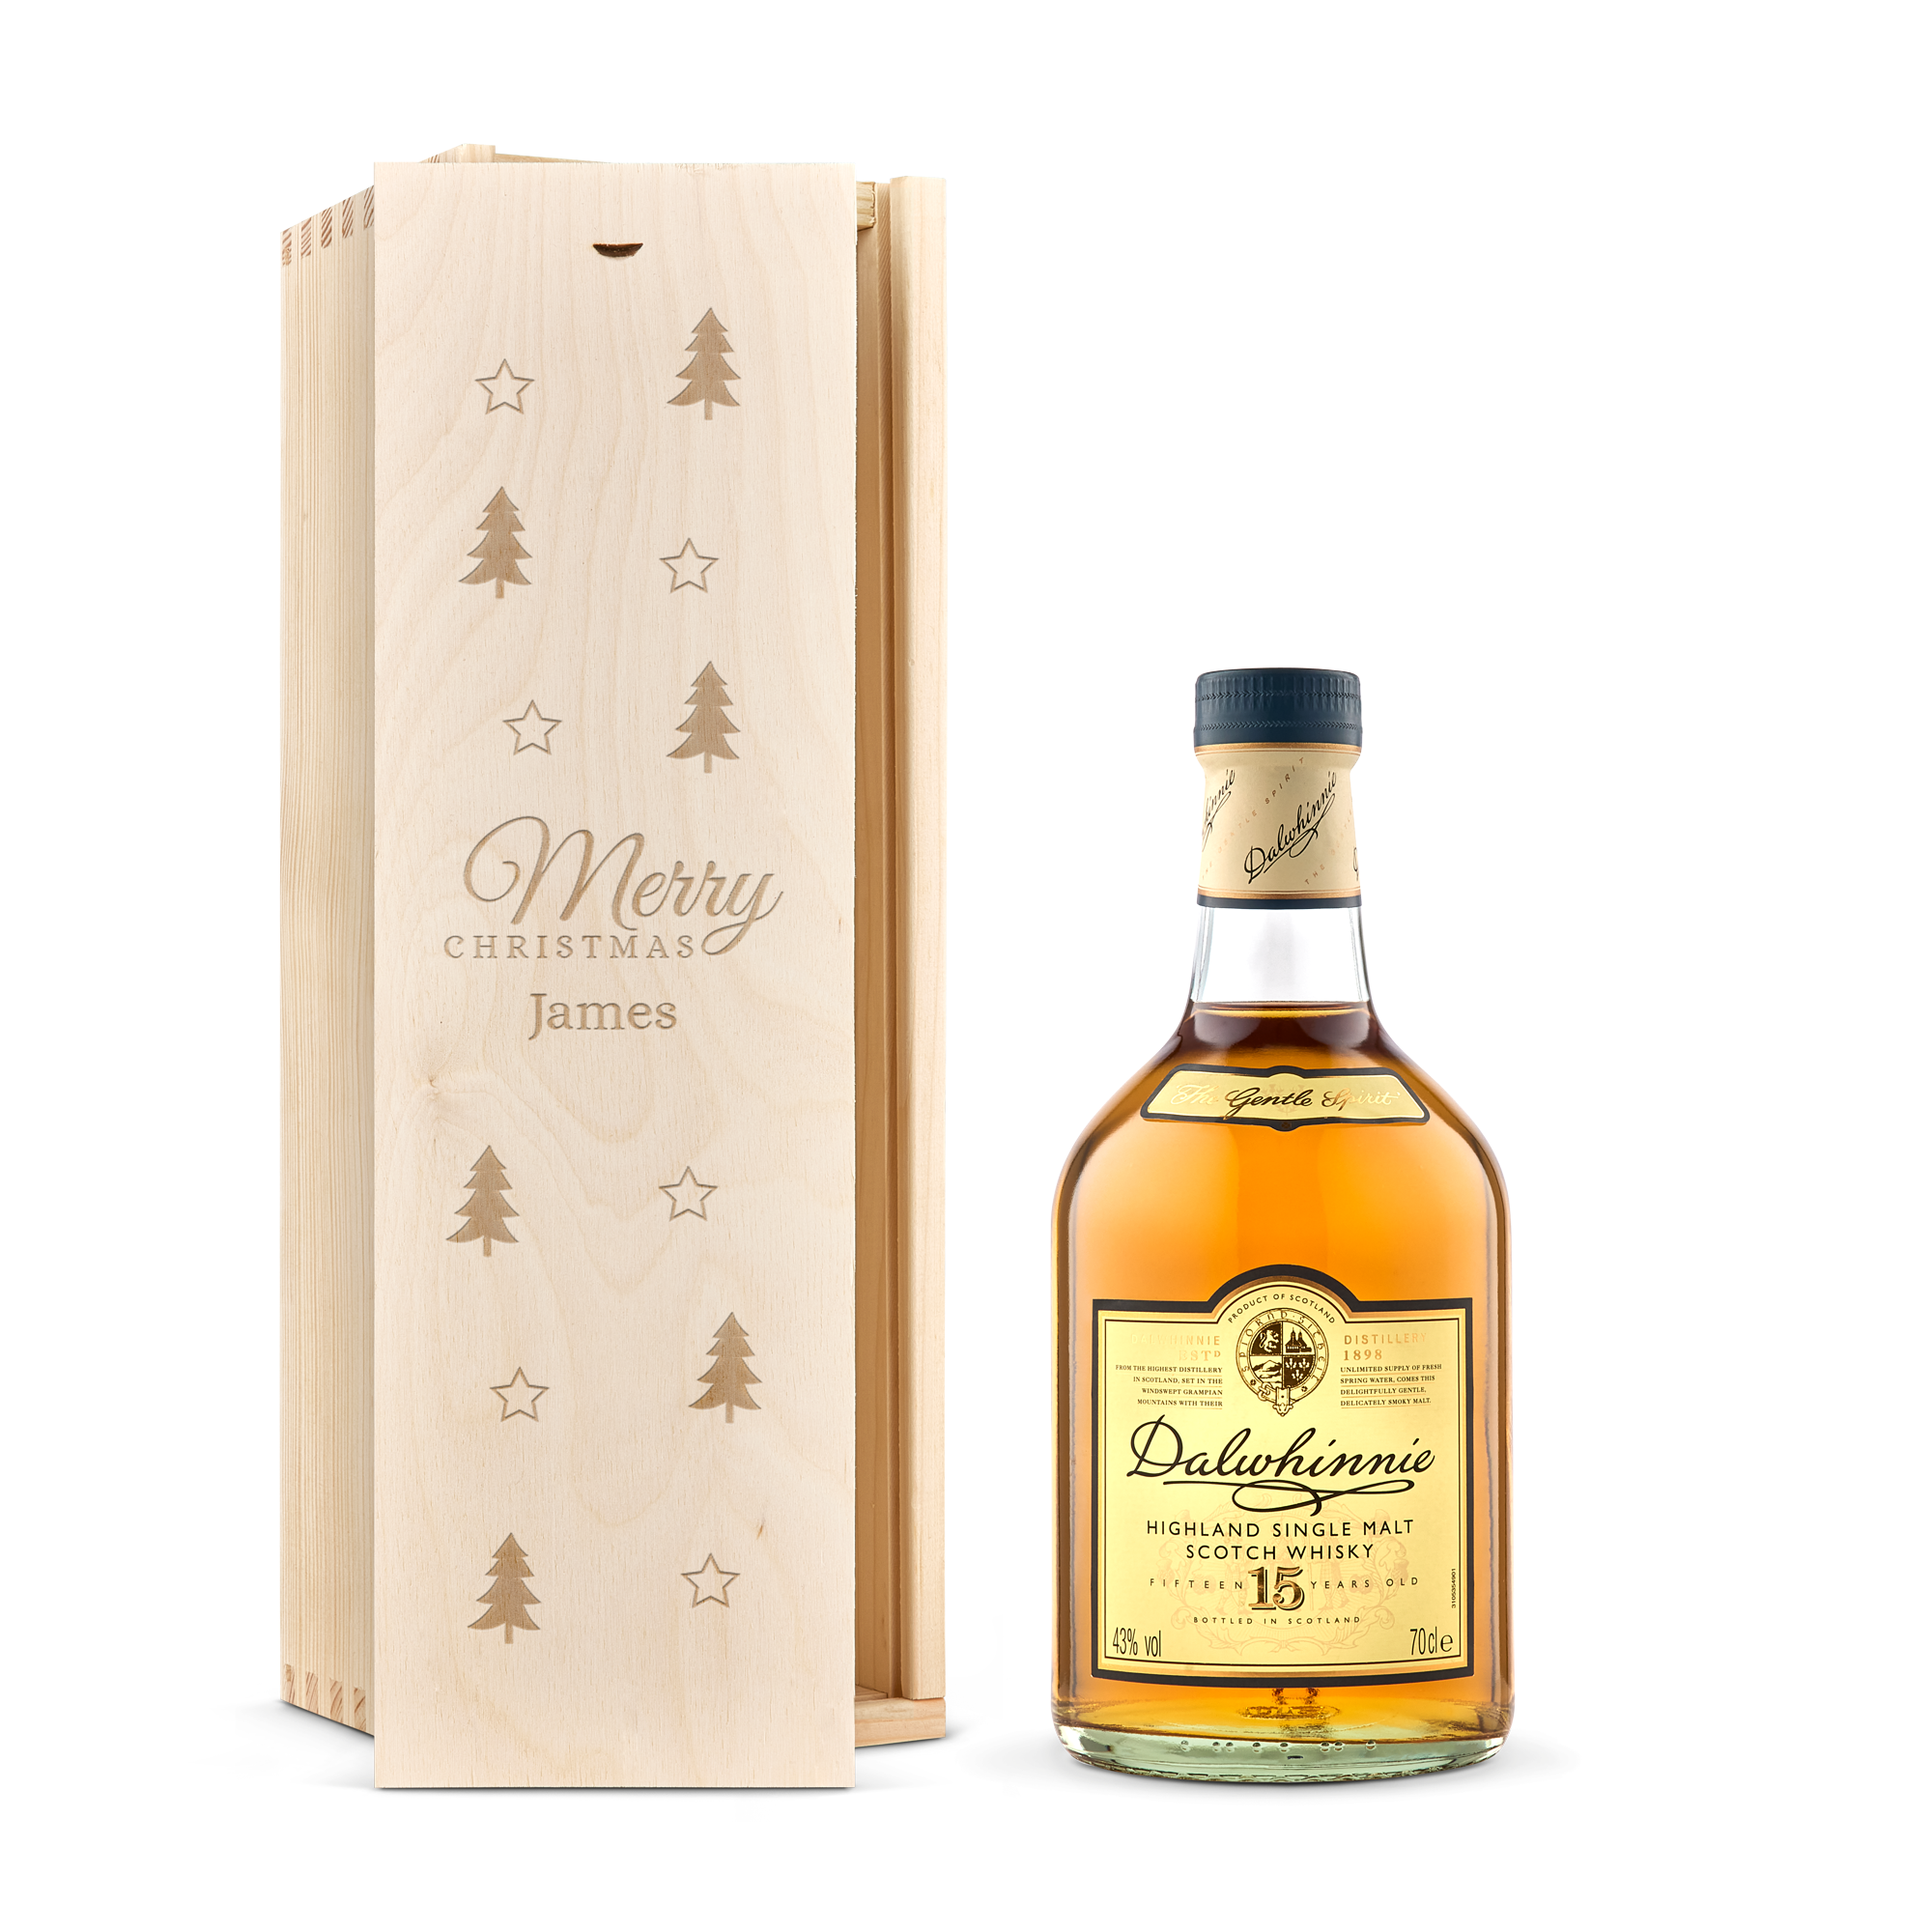 Personalised whiskey gift - Dalwhinnie - 15 years - Engraved wooden case